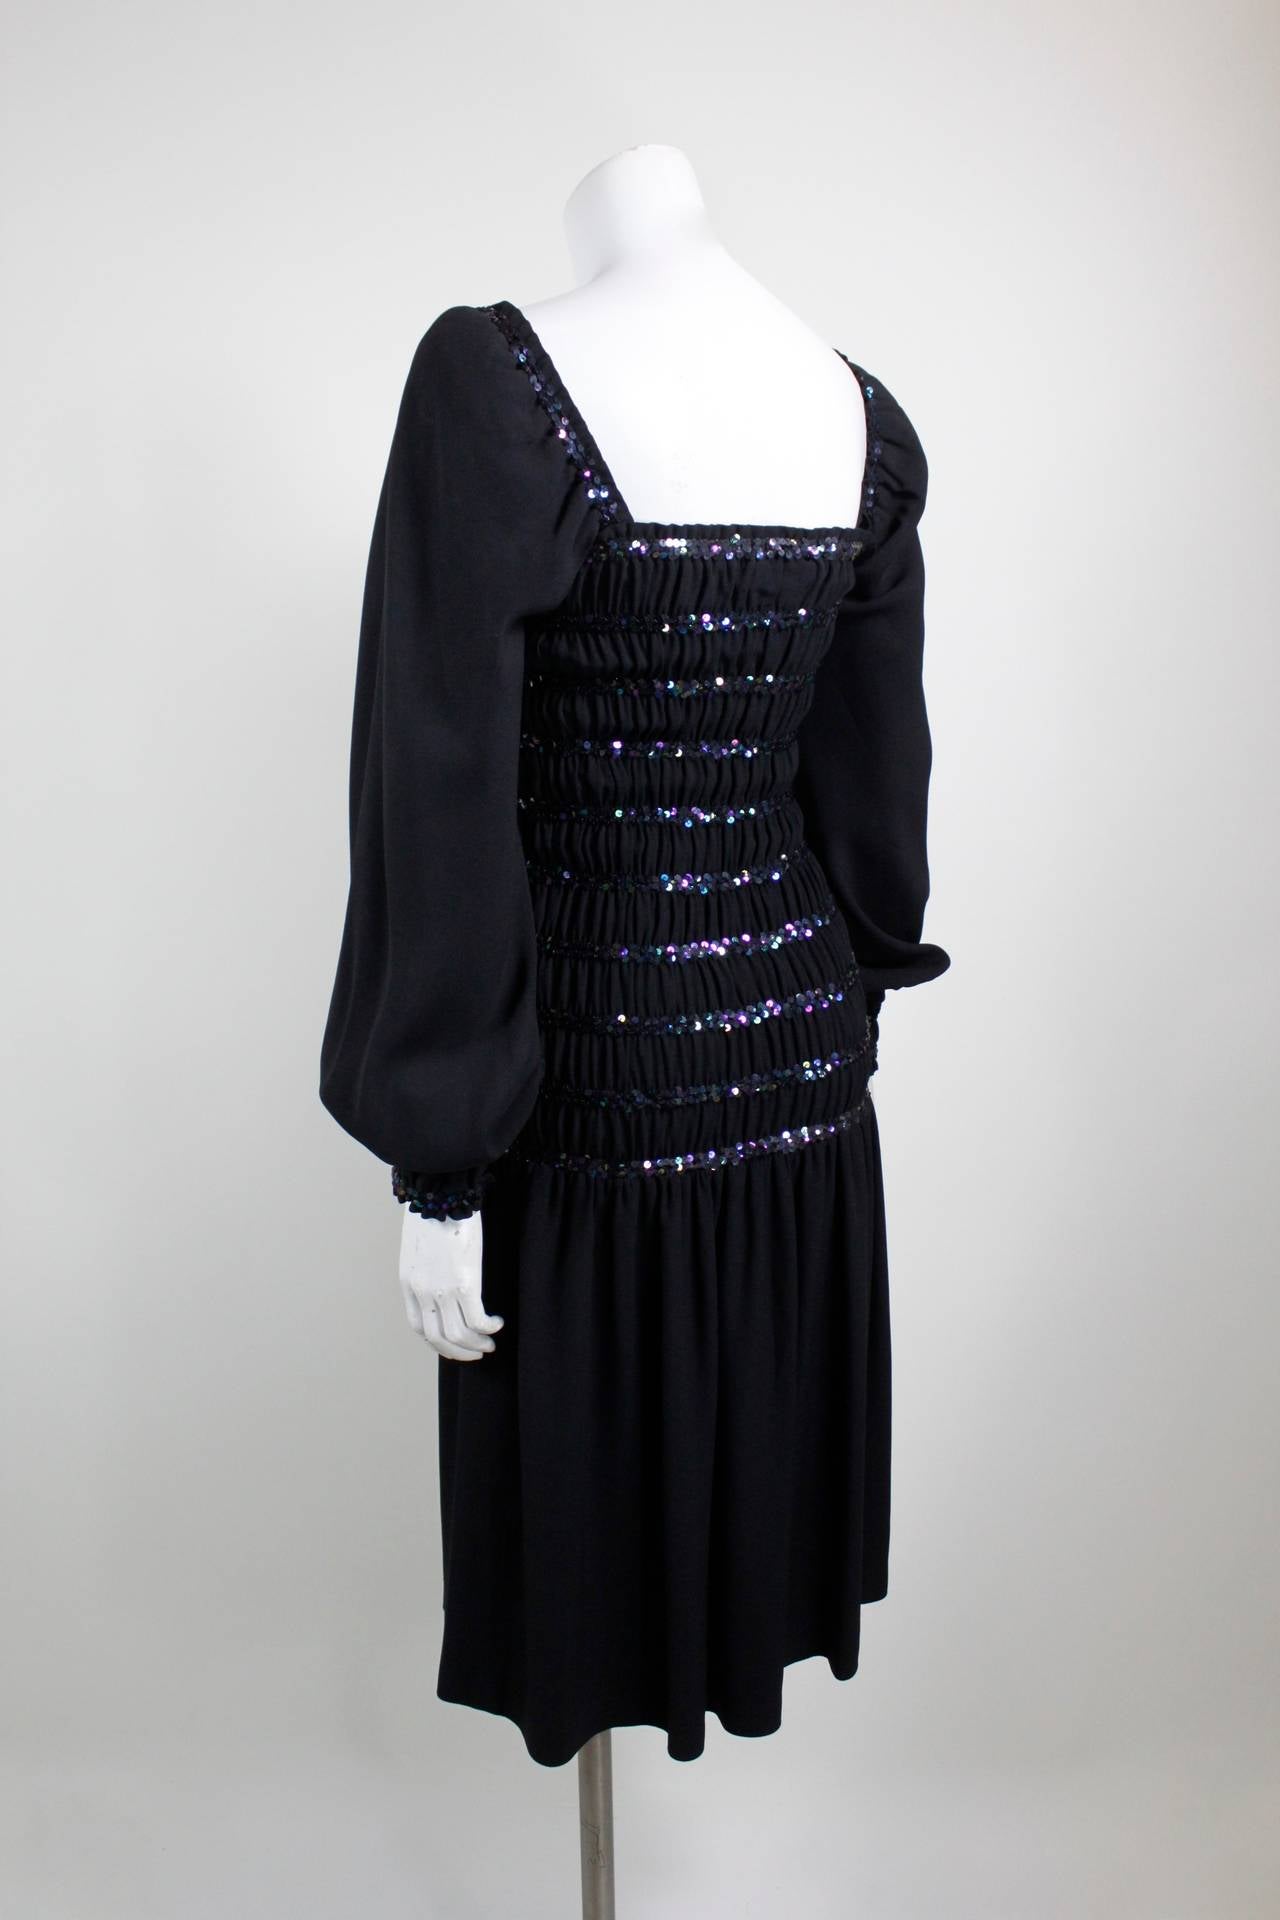 Women's YSL Black Peasant Dress with Iridescent Sequins